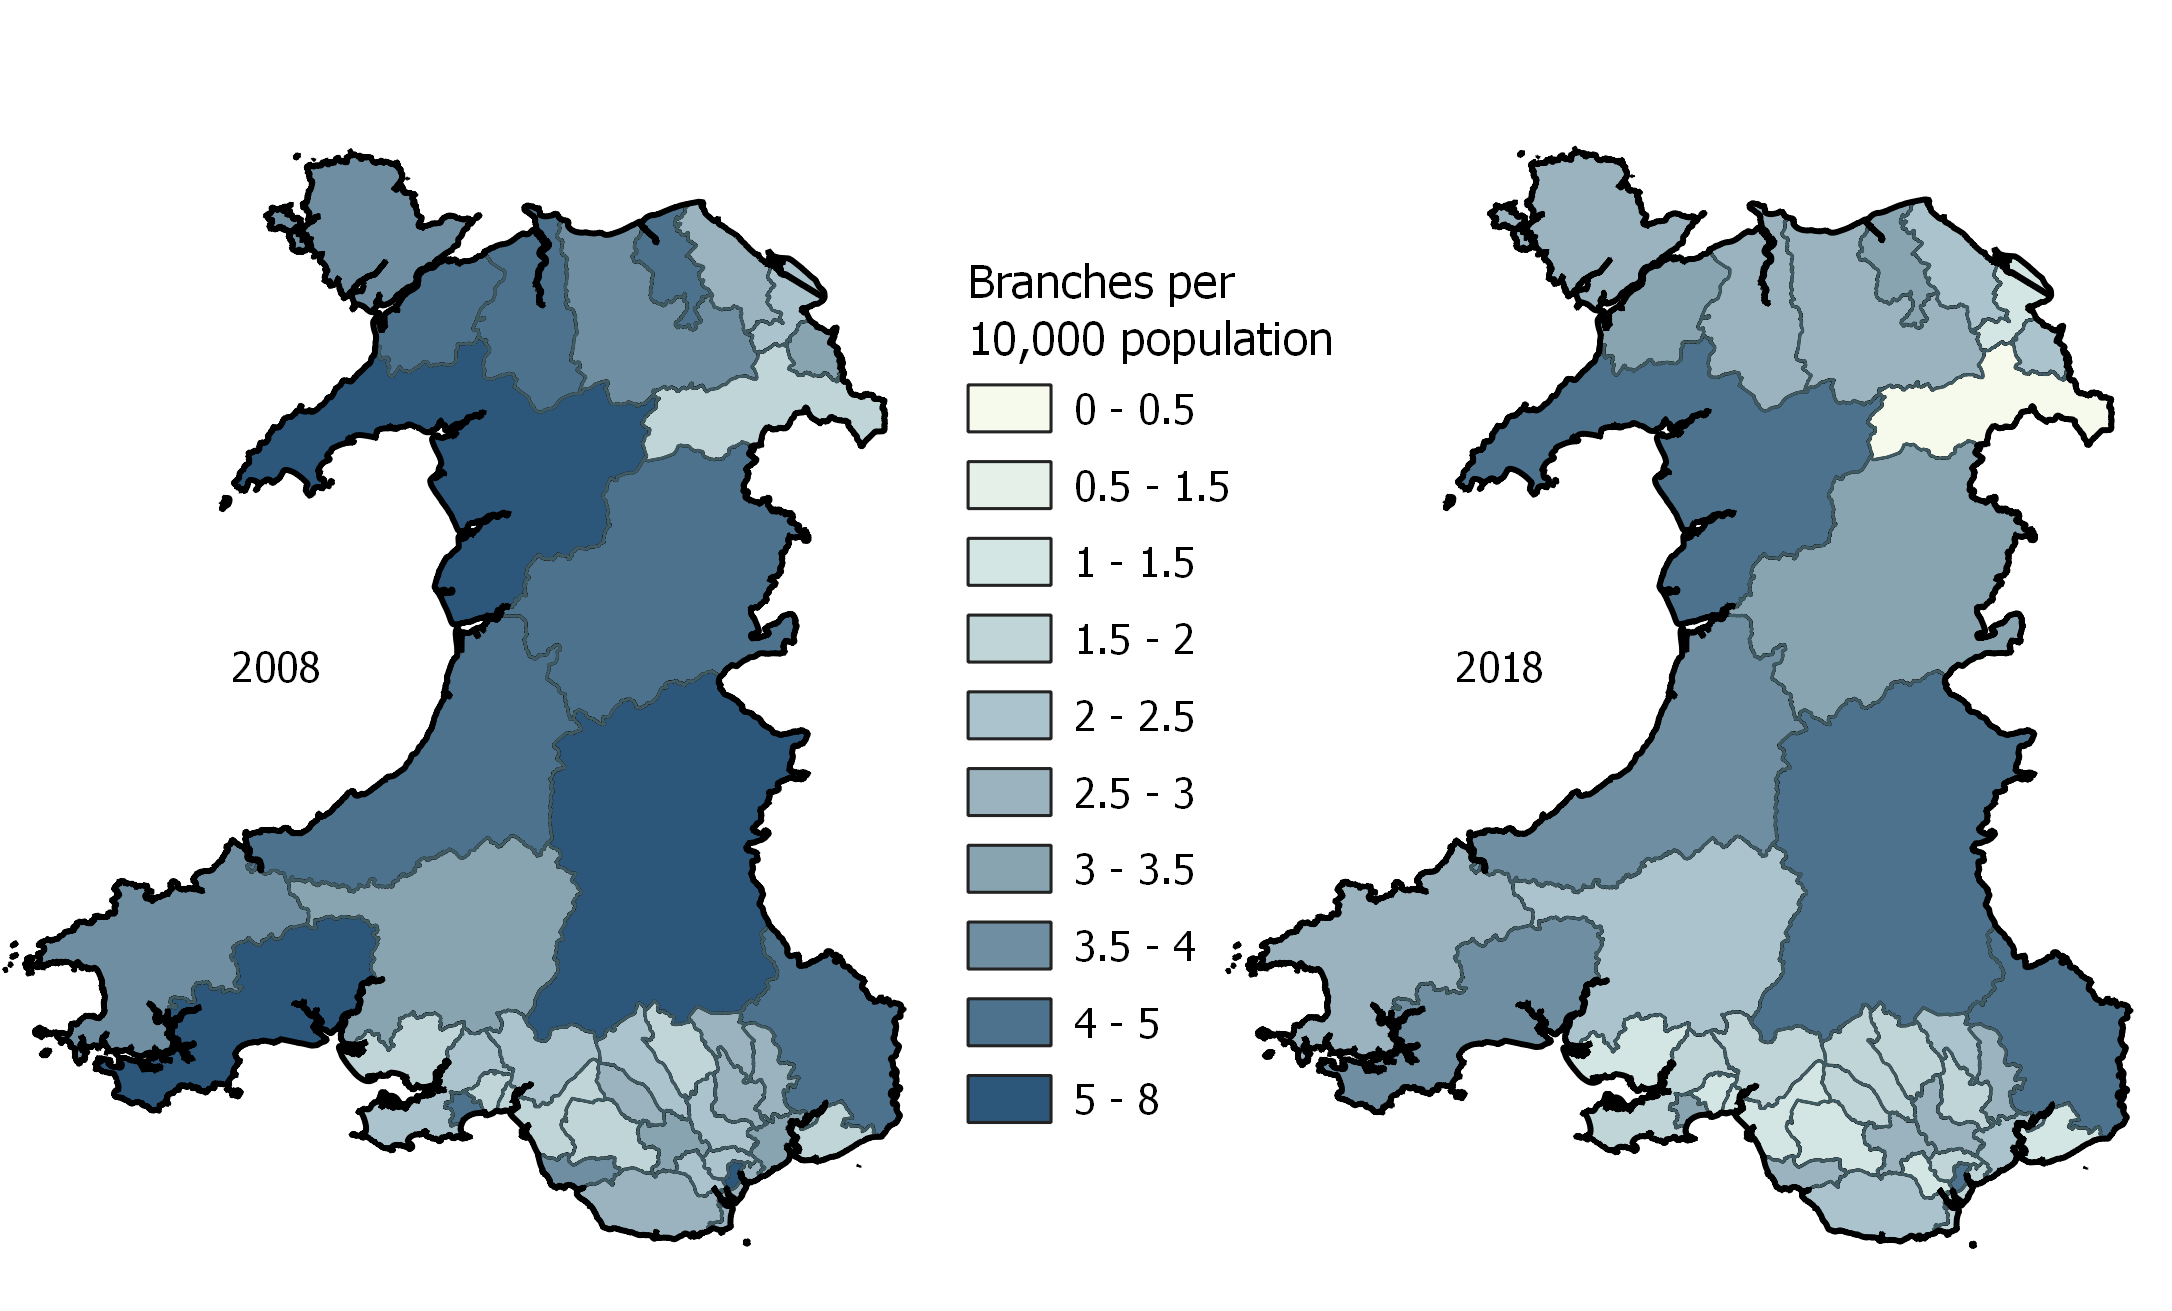 Two maps. The first map shows the number of bank branches per 10,000 population by constituency in 2008. The second map shows the number of bank branches per 10,000 population by constituency in 2018.